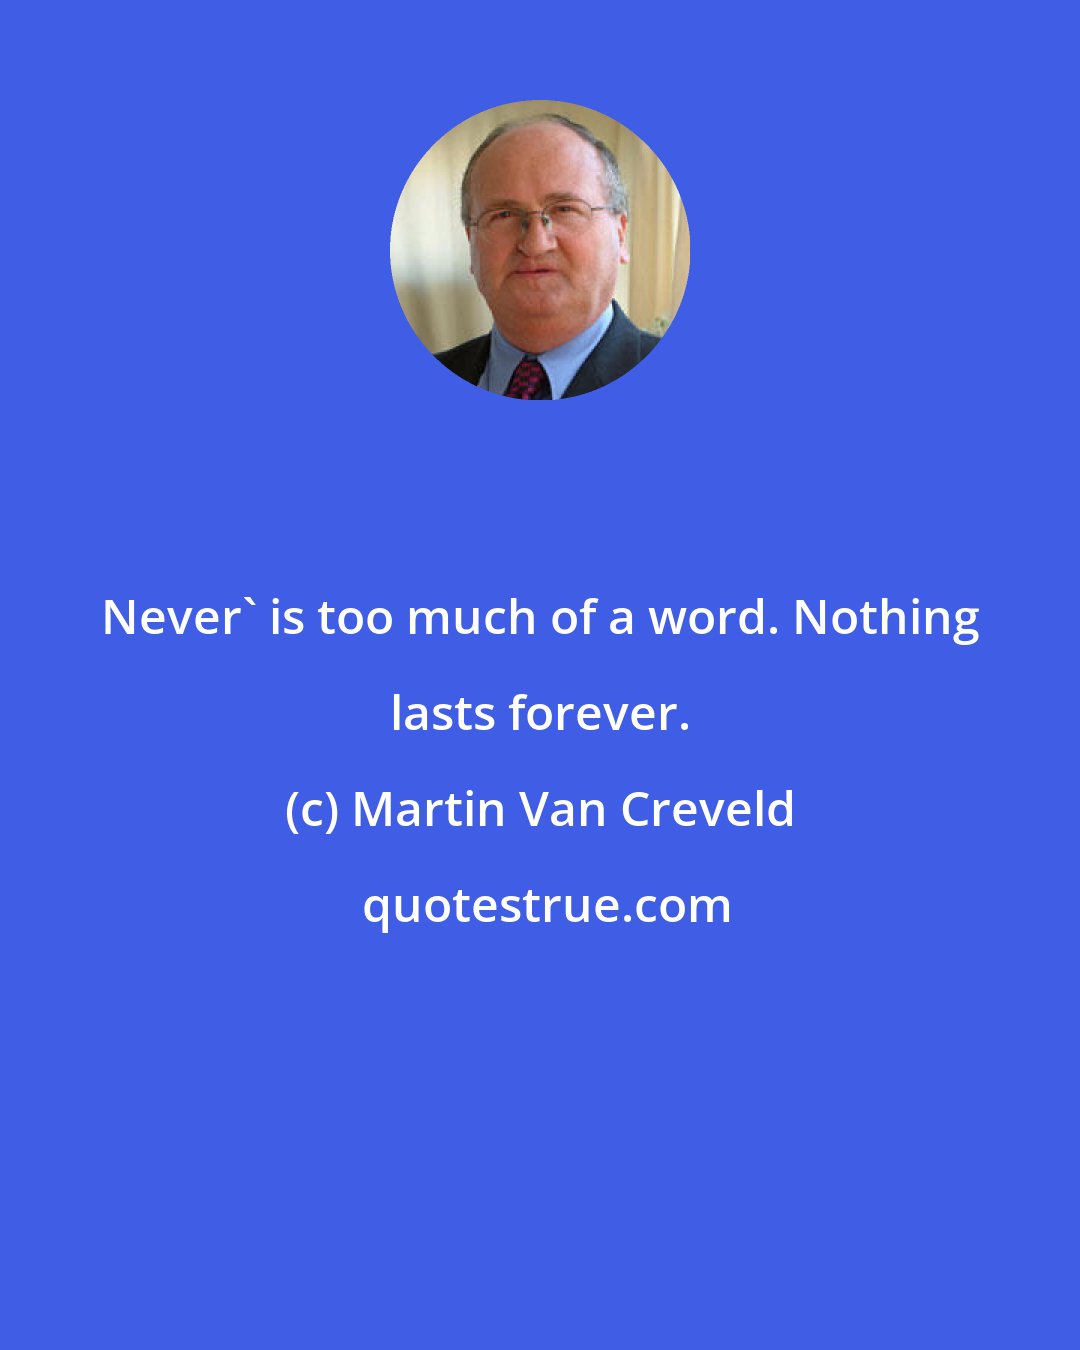 Martin Van Creveld: Never' is too much of a word. Nothing lasts forever.